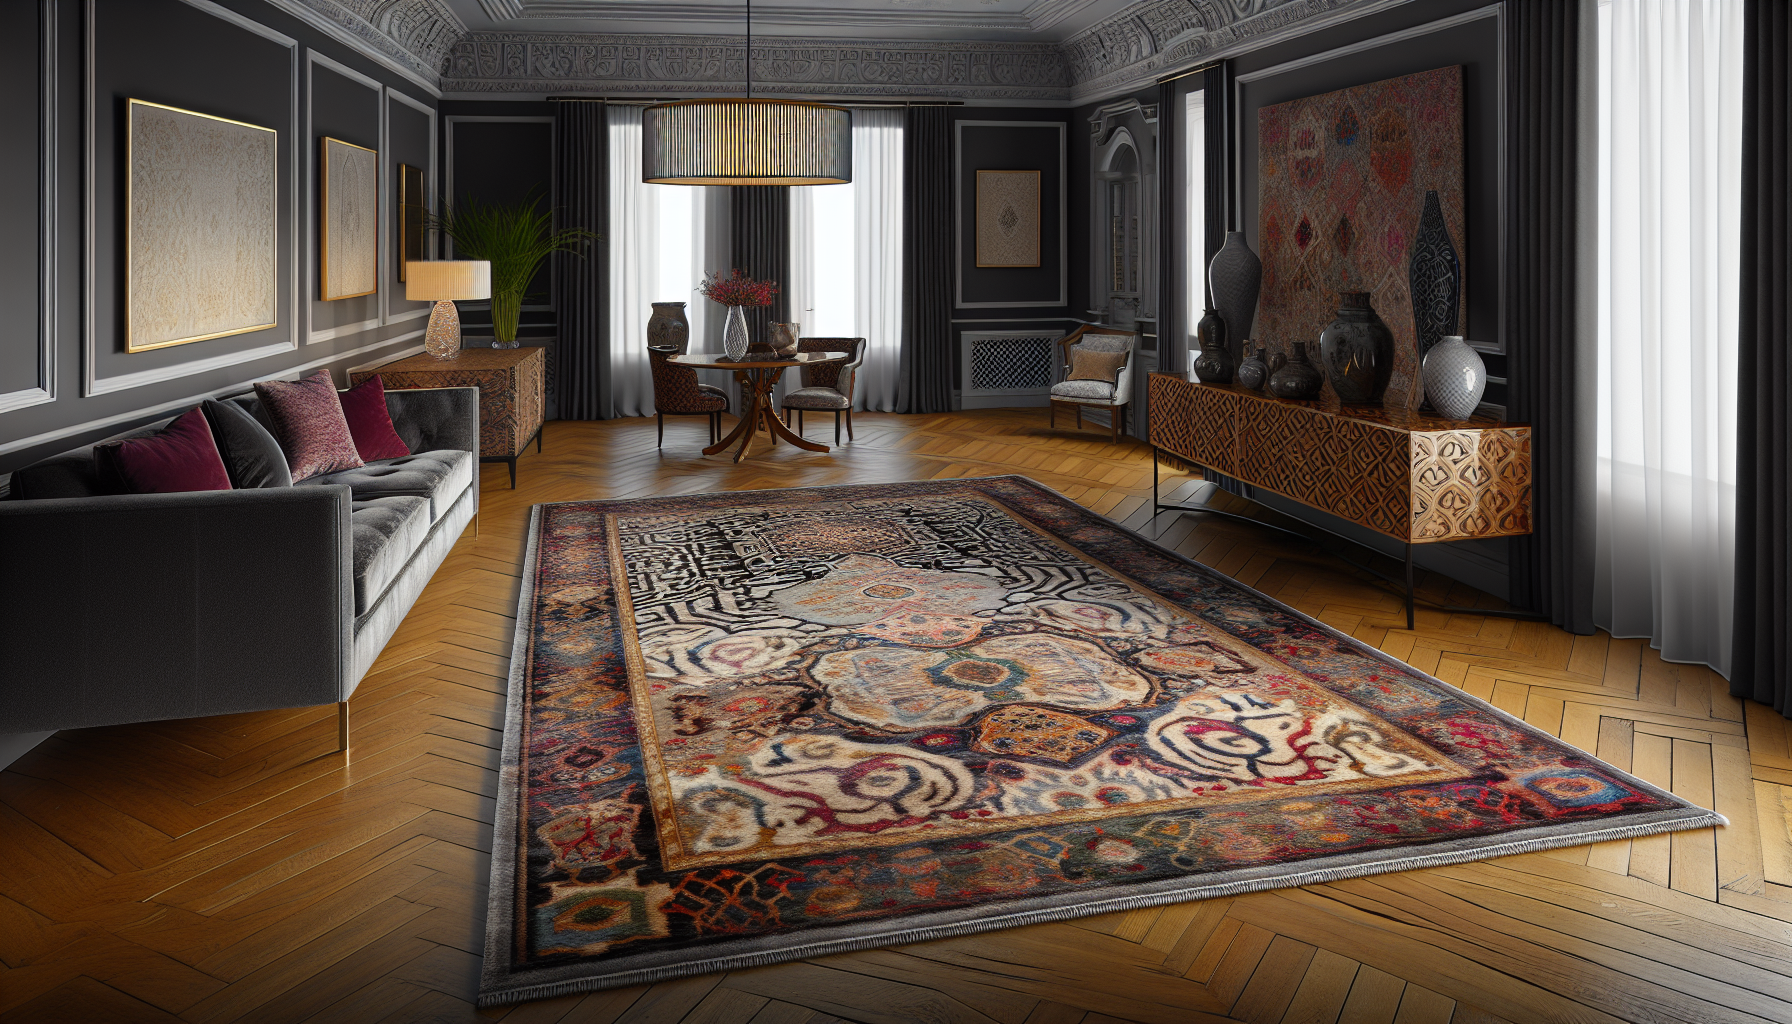 Show-stopping rug anchoring the luxurious living room